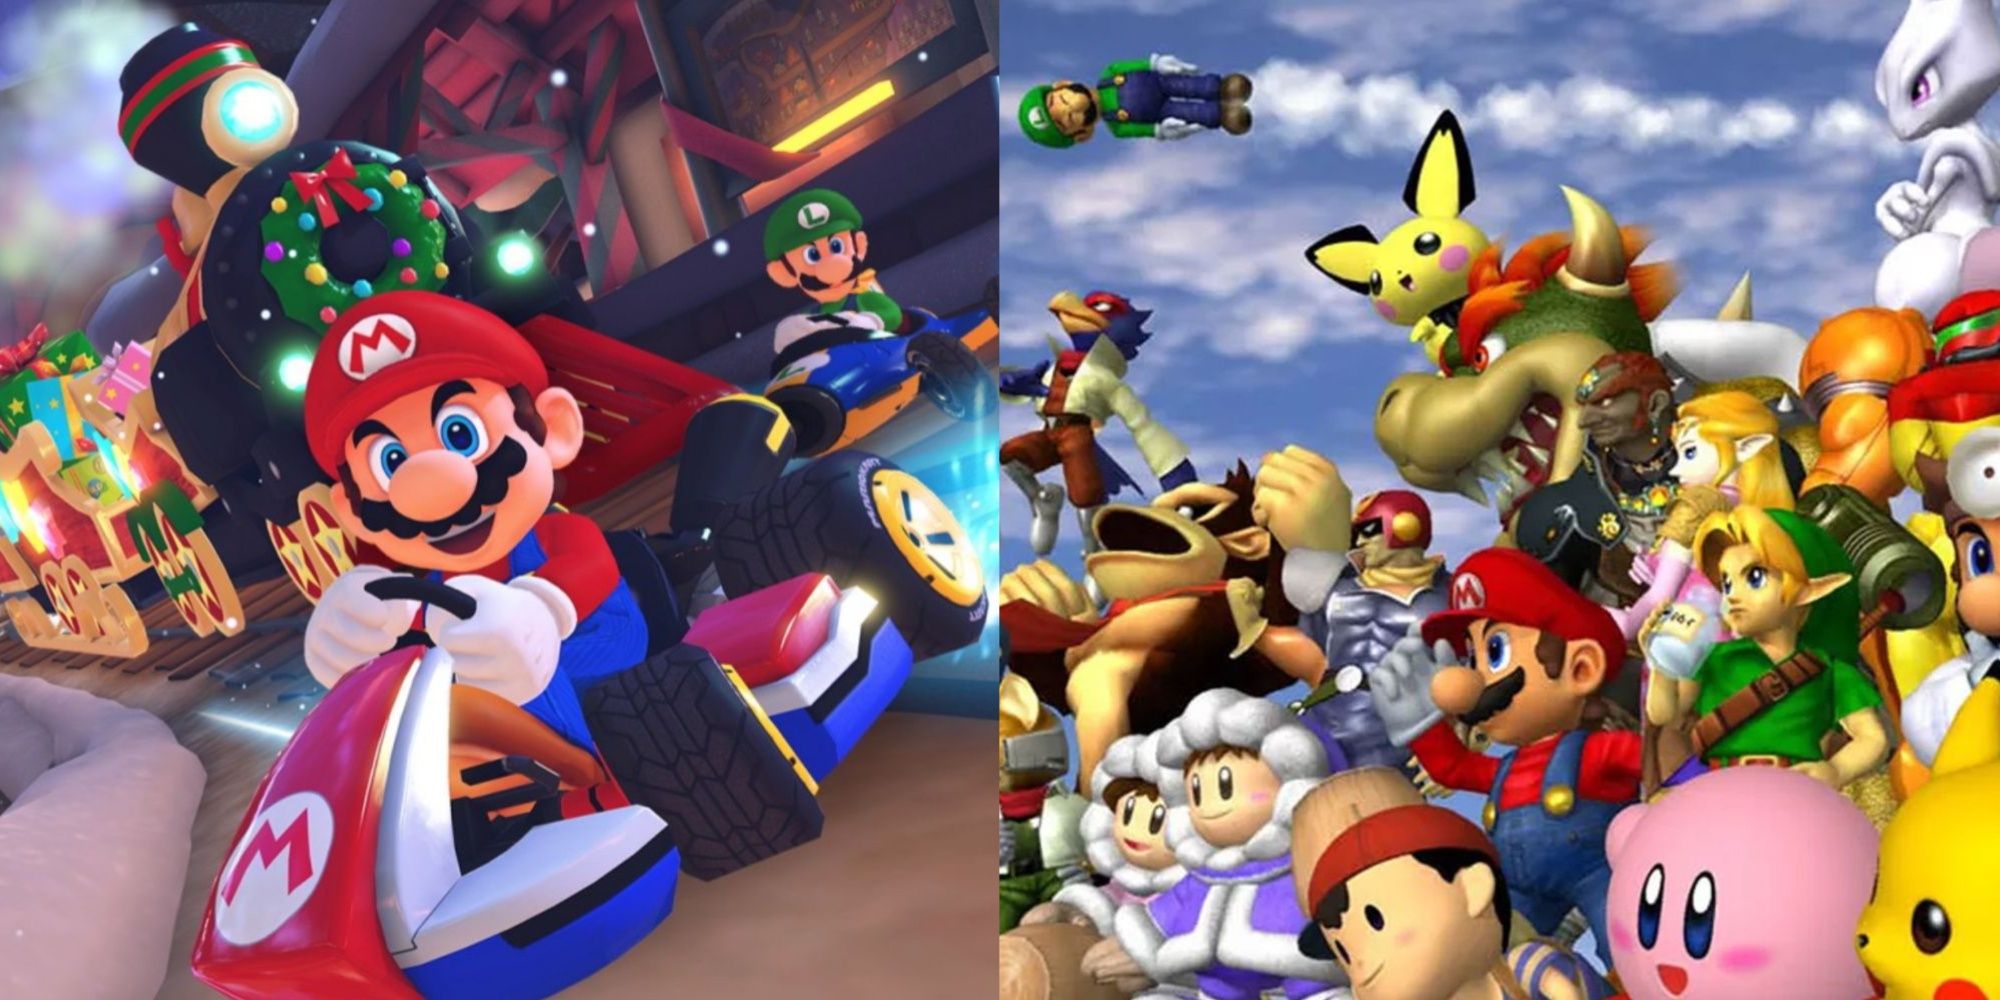 Mario and Luigi racing in Mario Kart 8 and the splash screen from Super Smash Bros. Melee